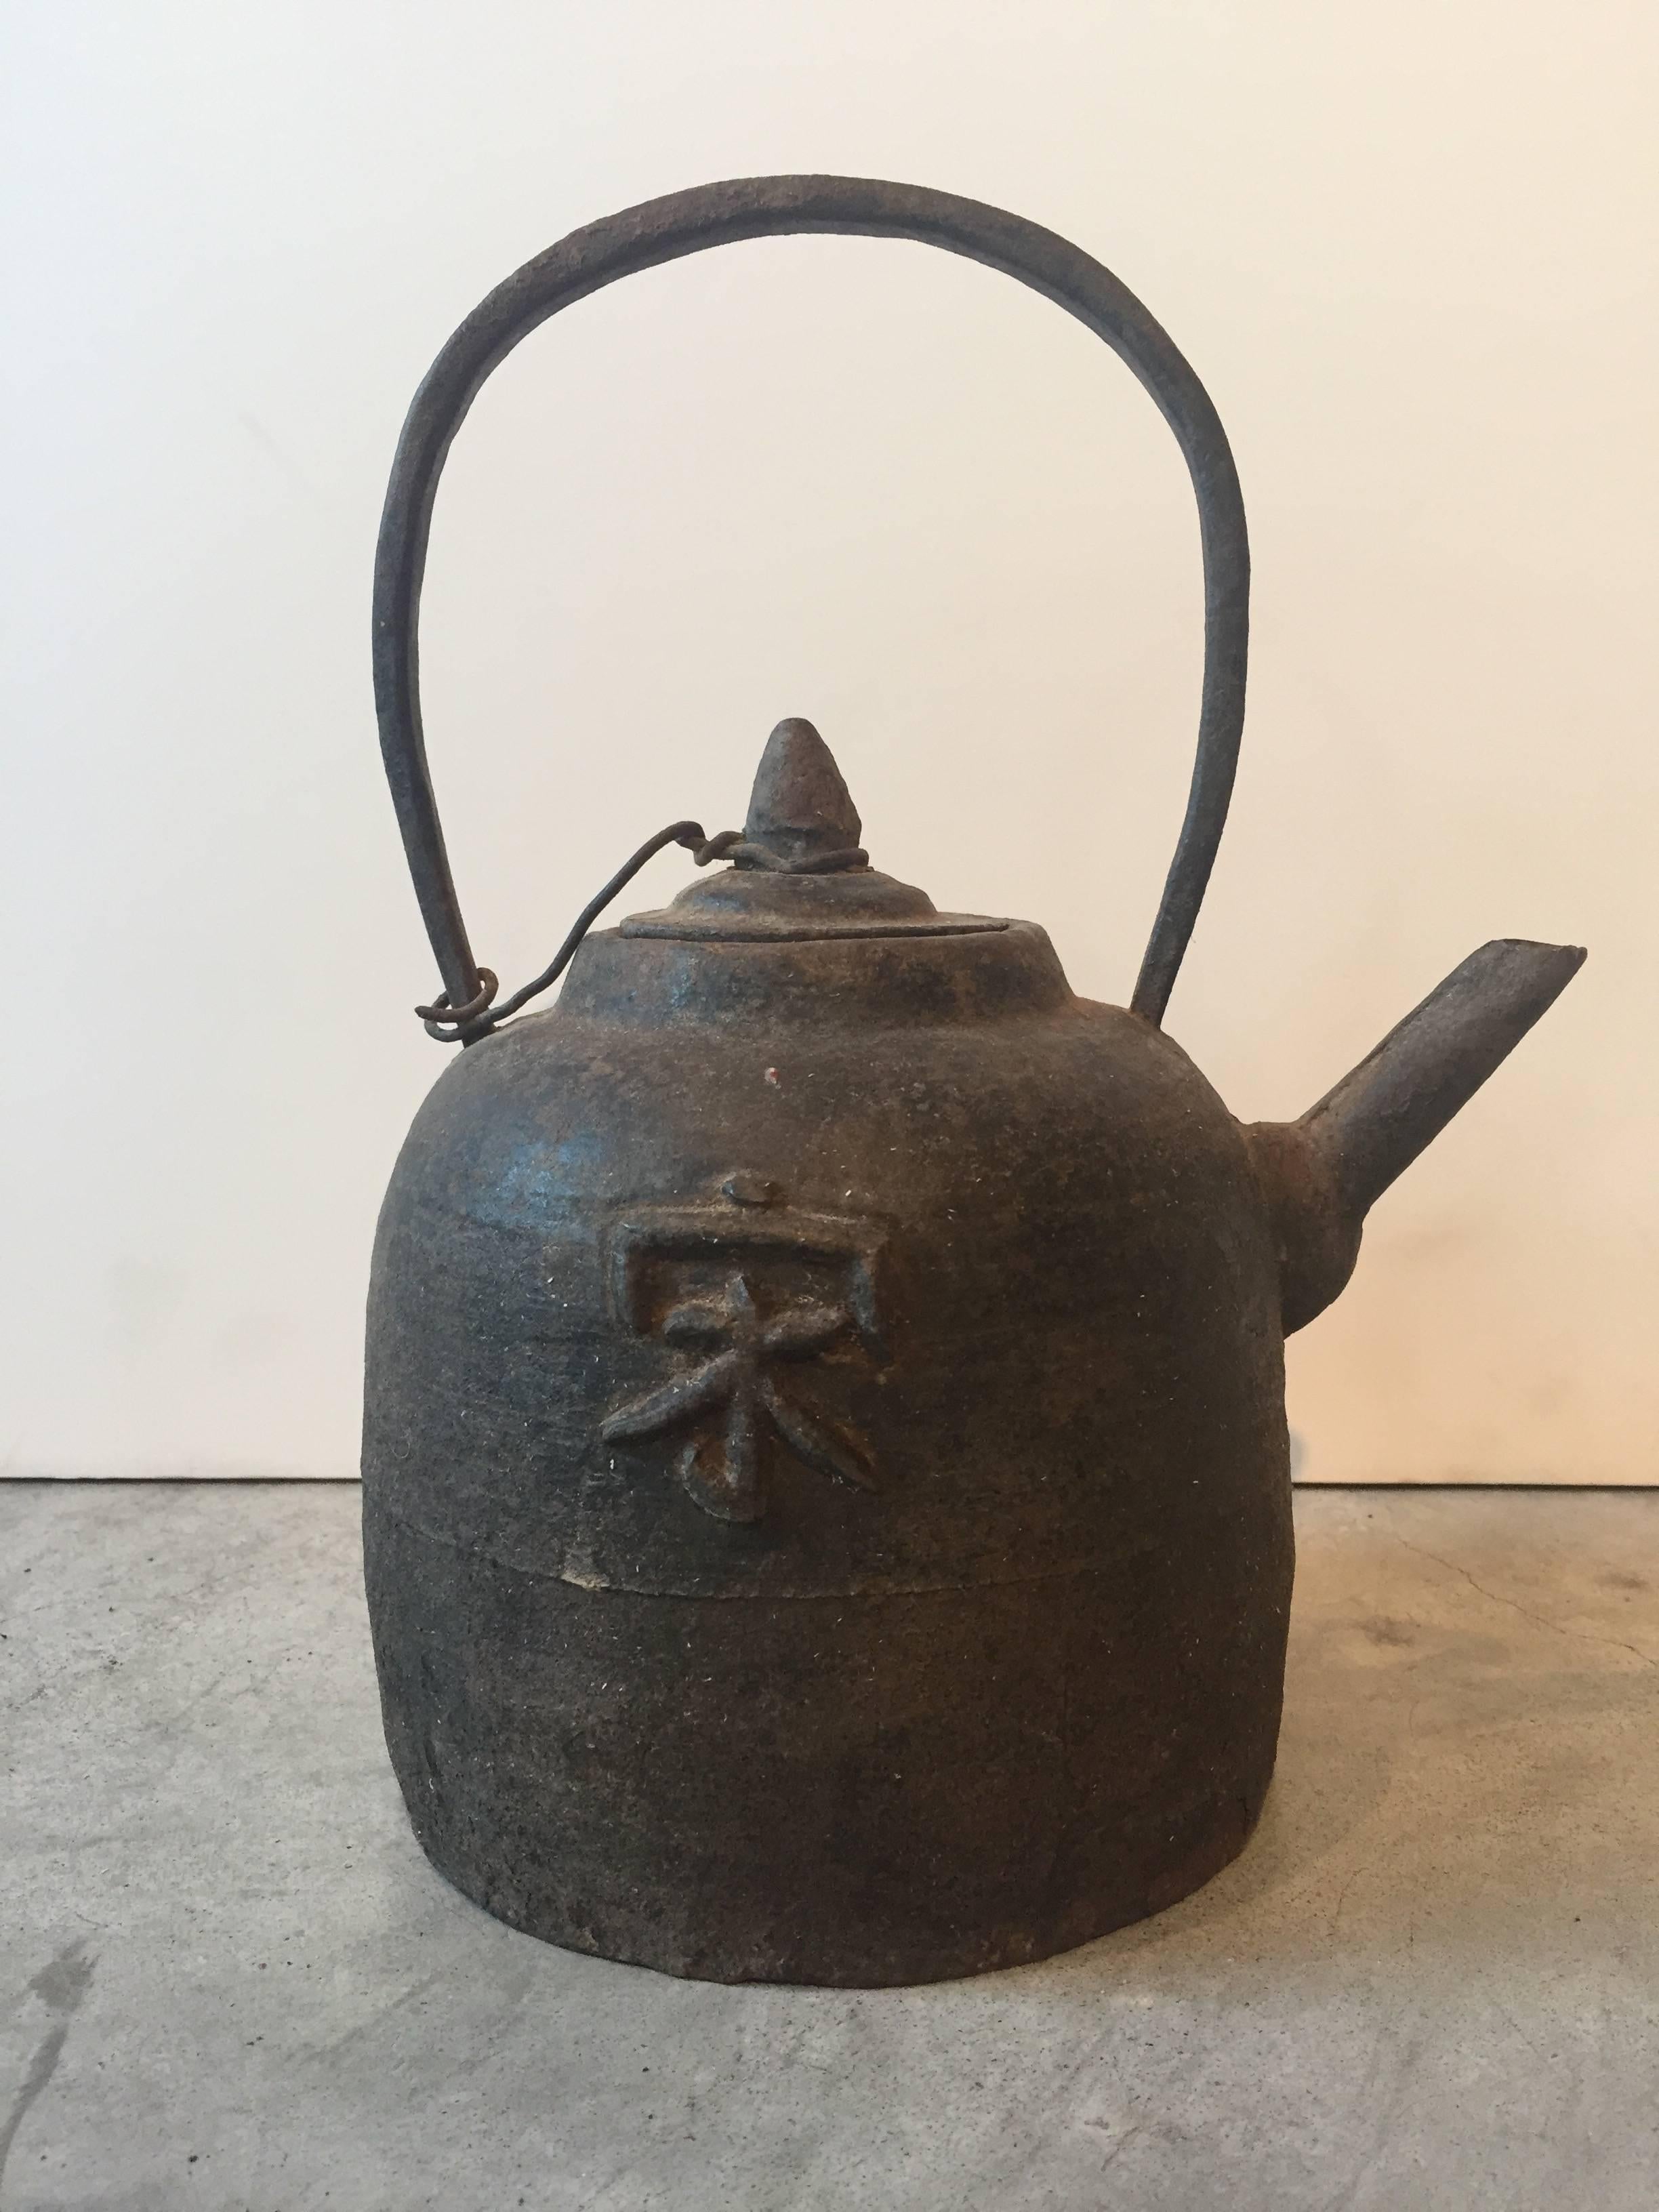 An unusual antique Chinese cast iron teapot with a large Chinese character in the center. From Shanxi Province, circa 1880.
M676.